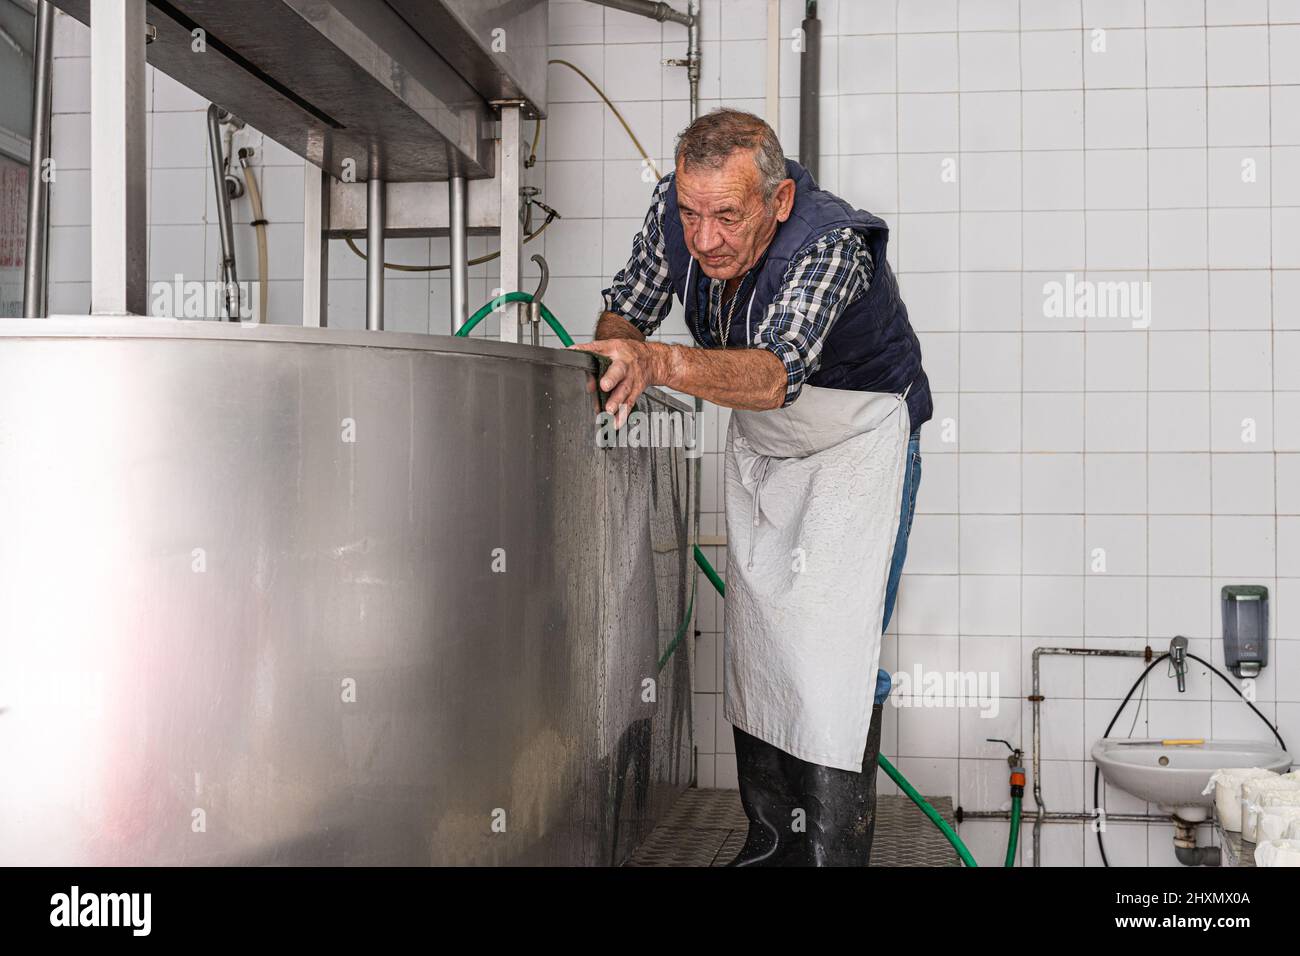 old man in an apron scrubbing the outside of stainless steel container Stock Photo